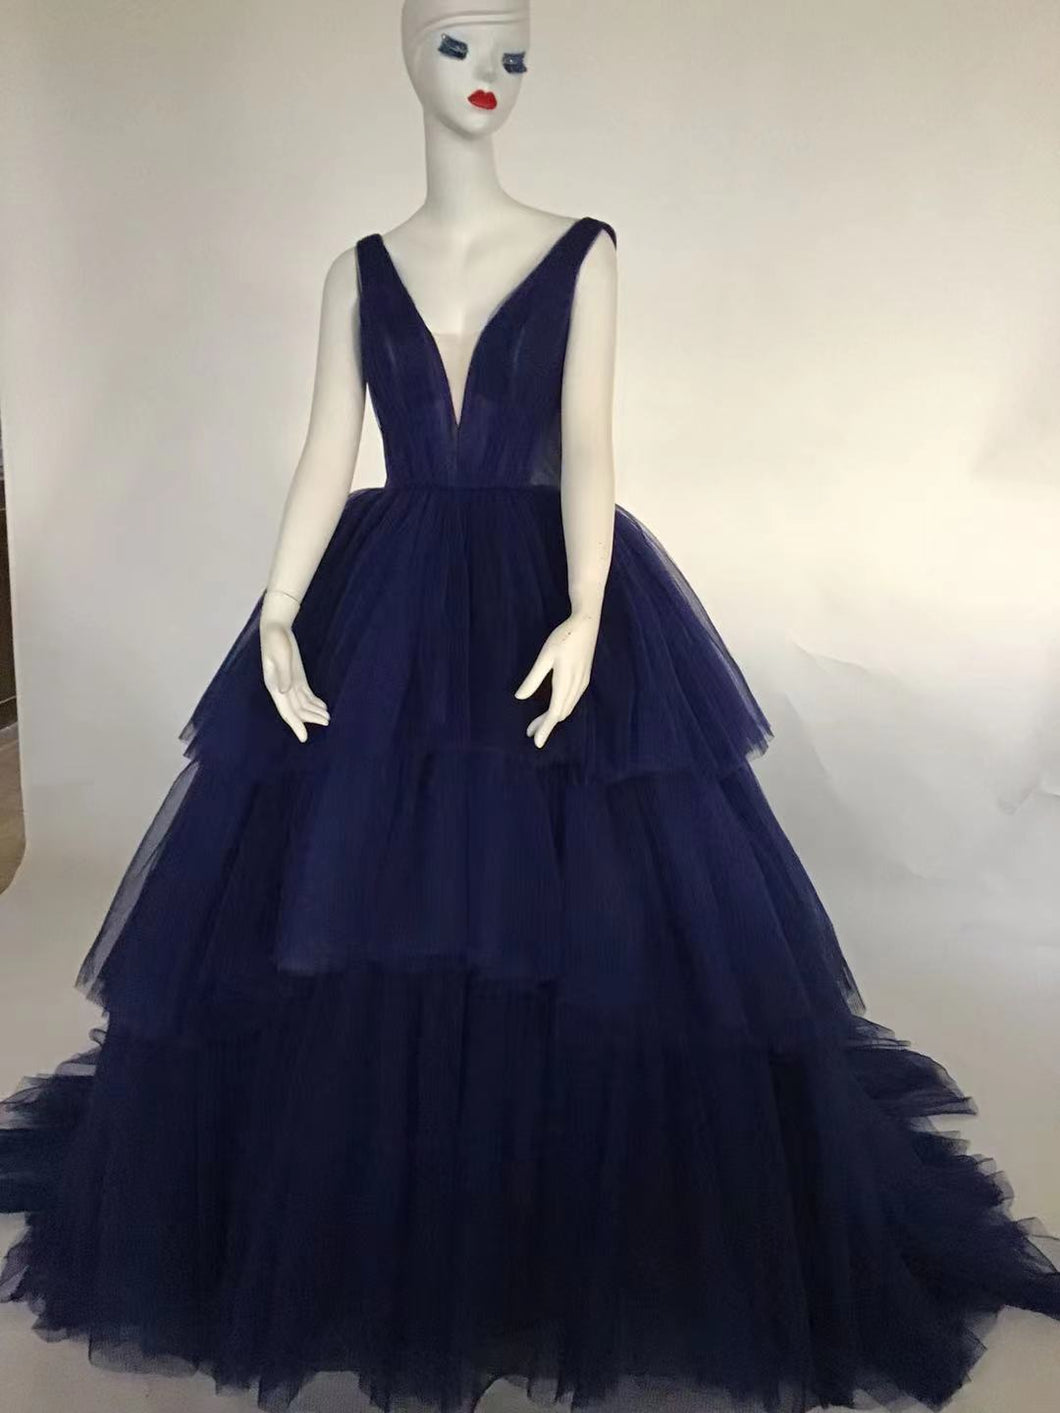 Style DOL31 - Sleeveless v-neck formal ball gown with tiered skirt